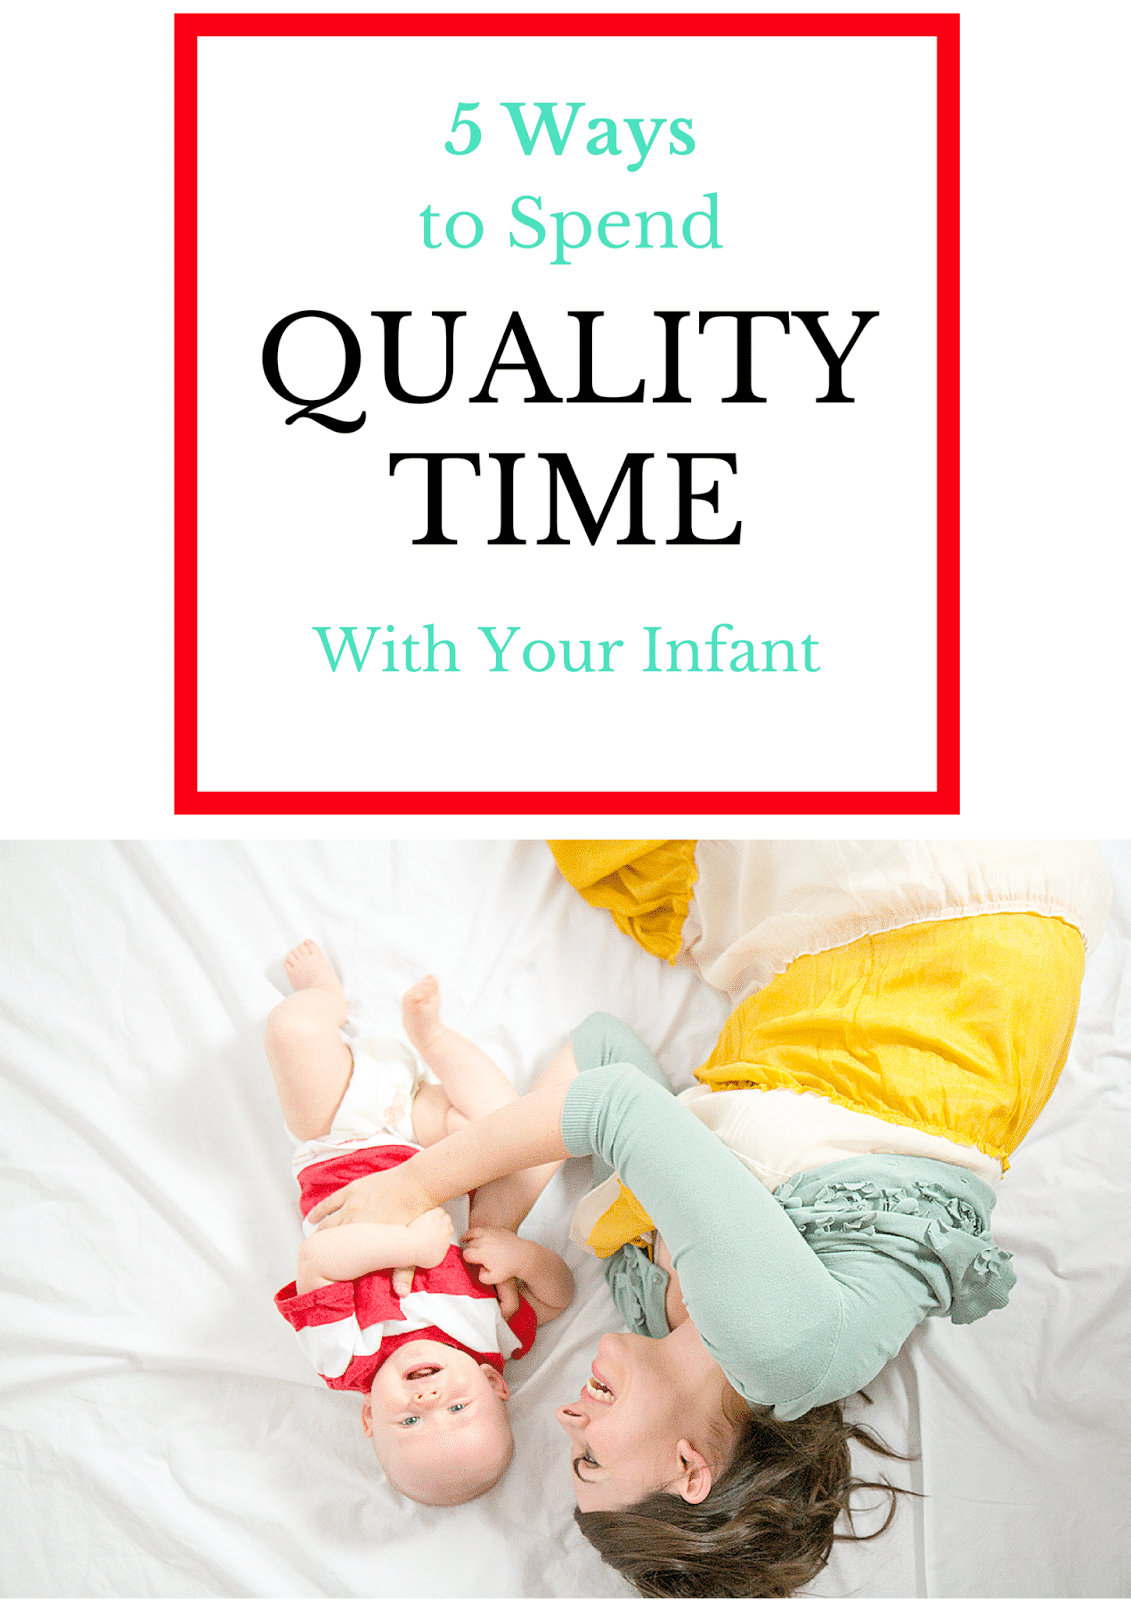 Spending quality time with your infant. 